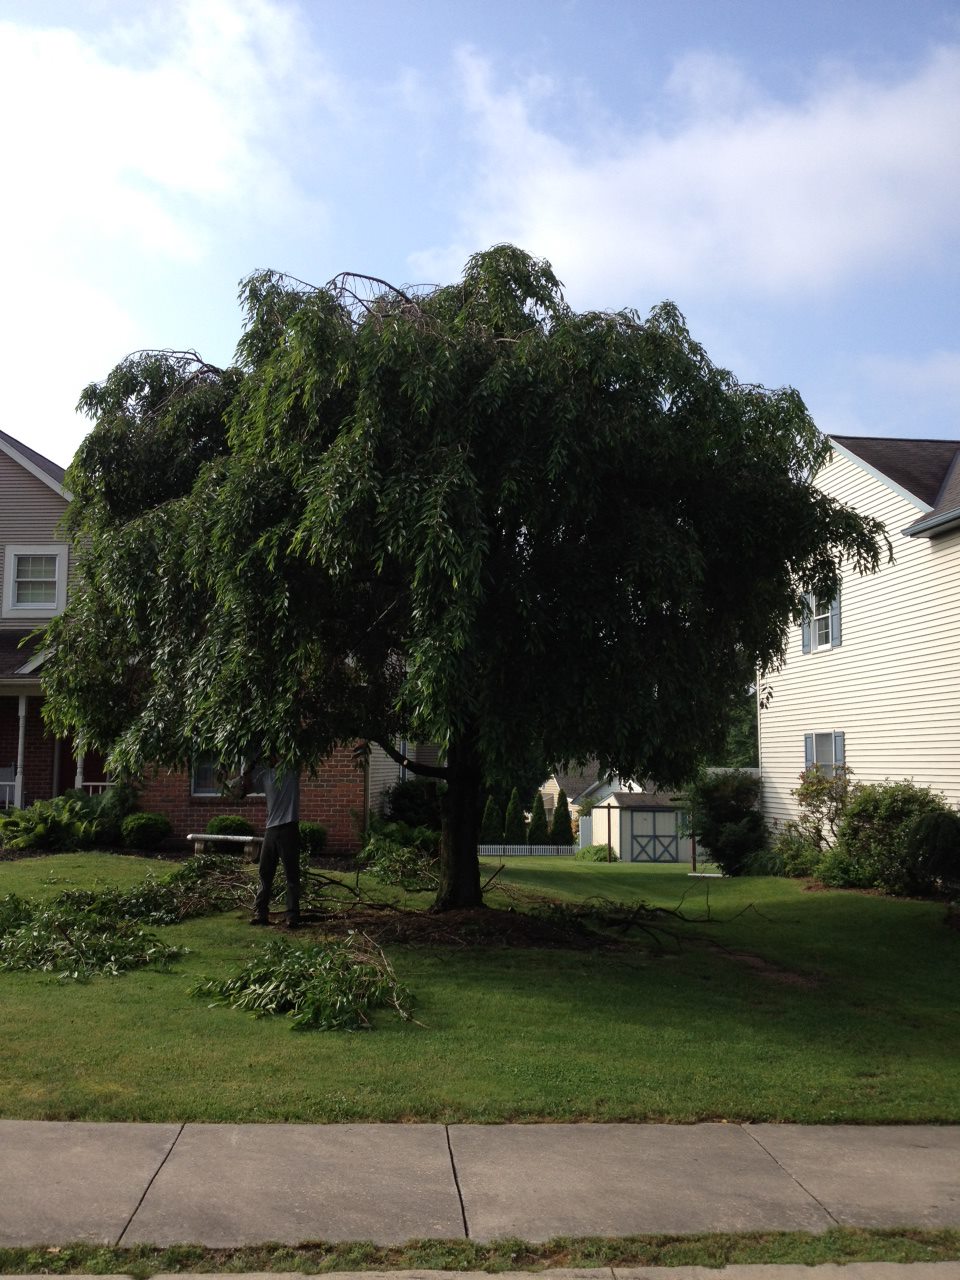 Expert Tree Care Services for Healthy and Vibrant Trees